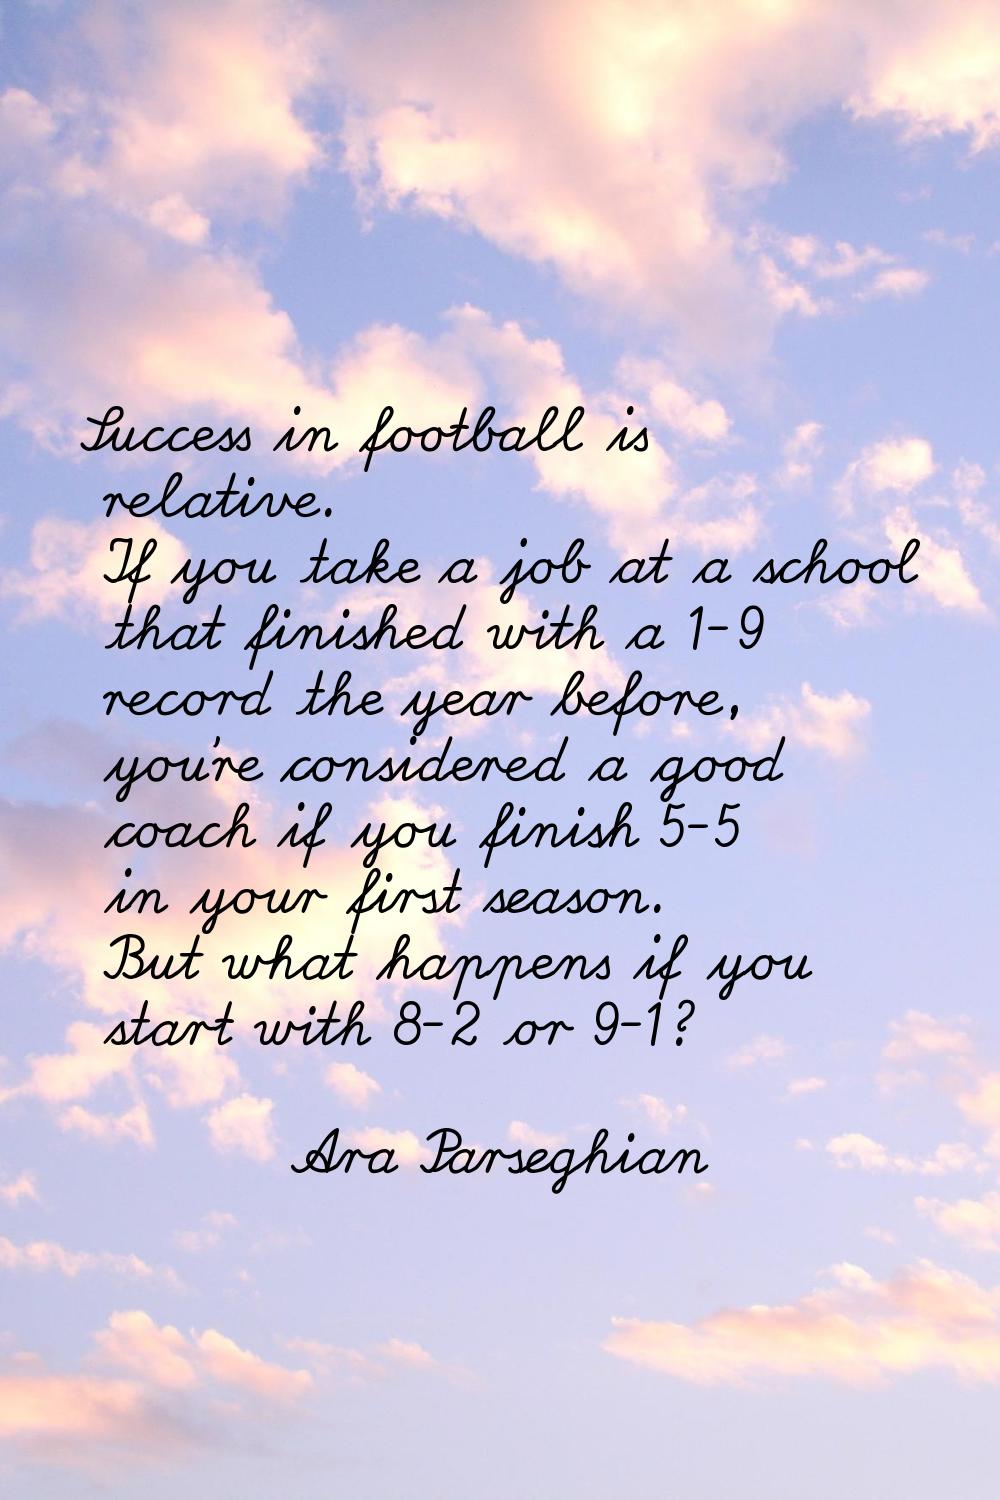 Success in football is relative. If you take a job at a school that finished with a 1-9 record the 